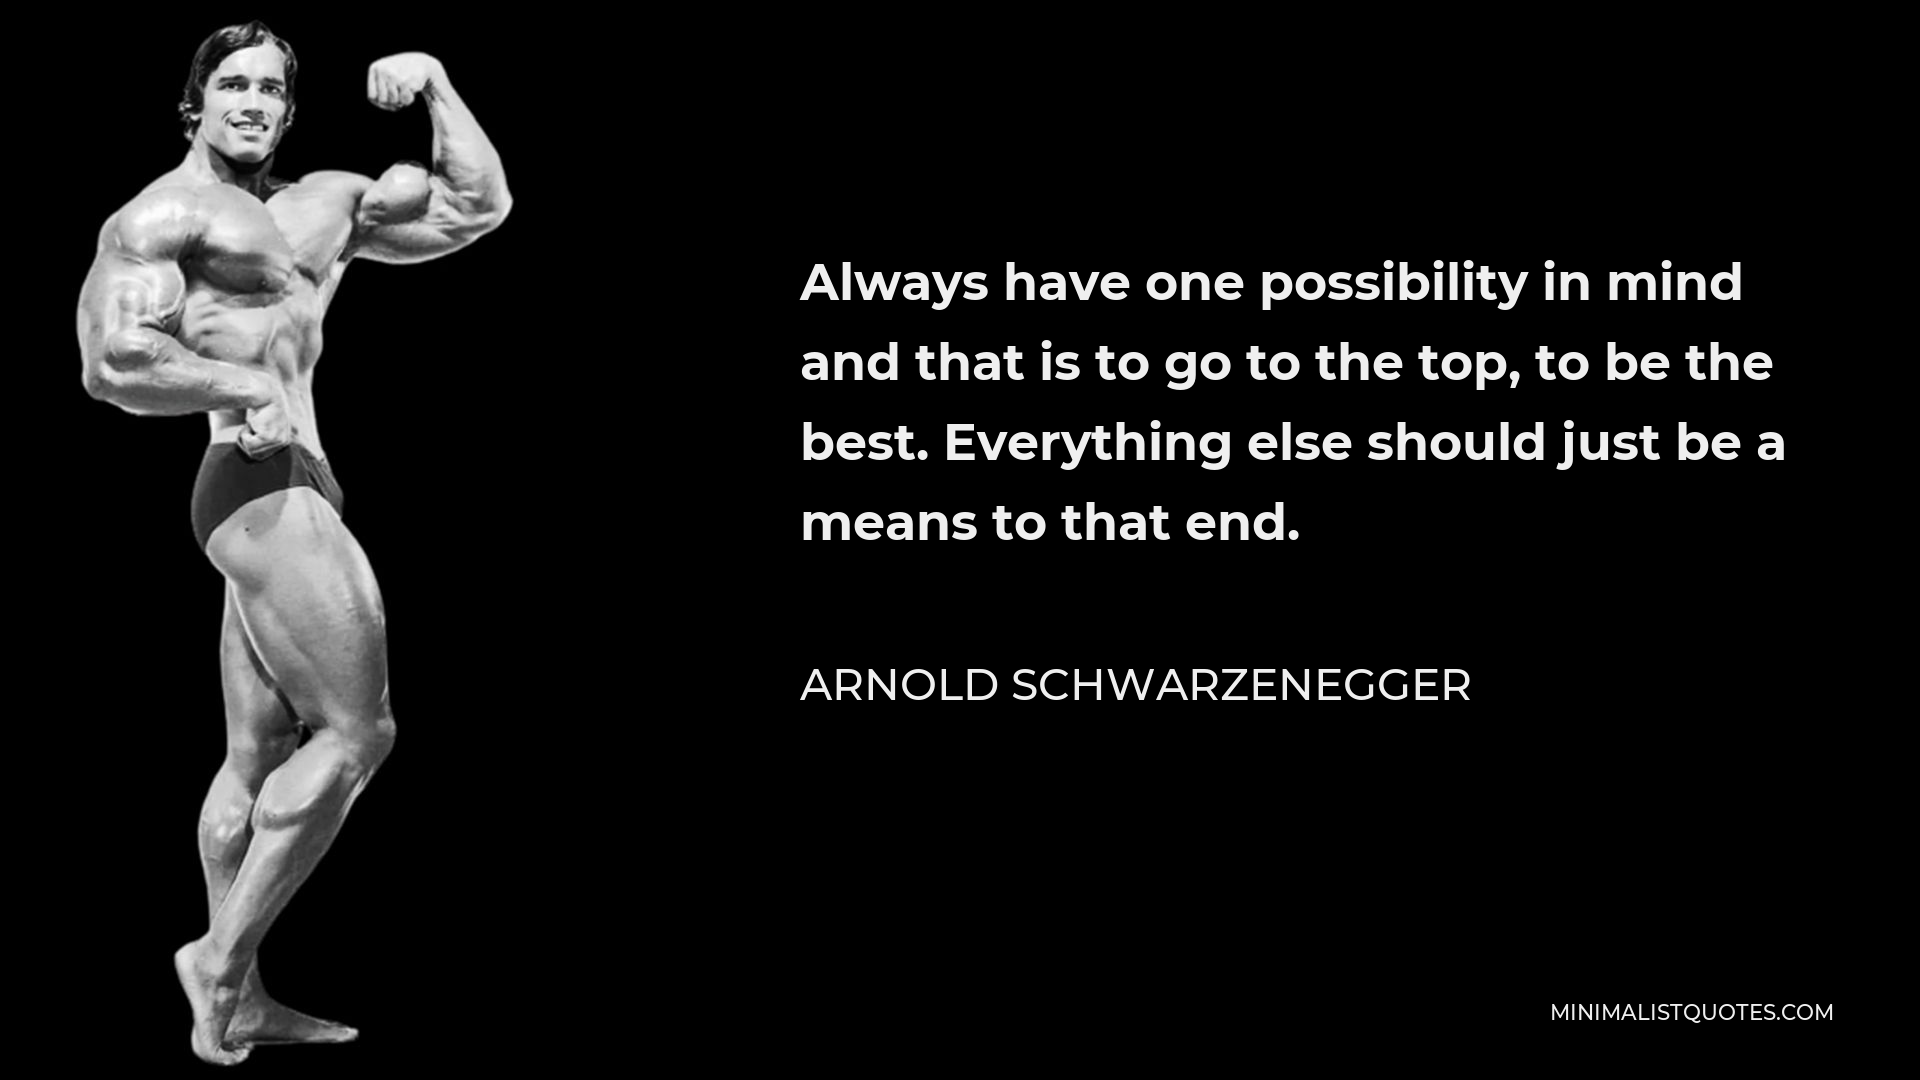 Arnold Schwarzenegger Quote - Always have one possibility in mind and that is to go to the top, to be the best. Everything else should just be a means to that end.